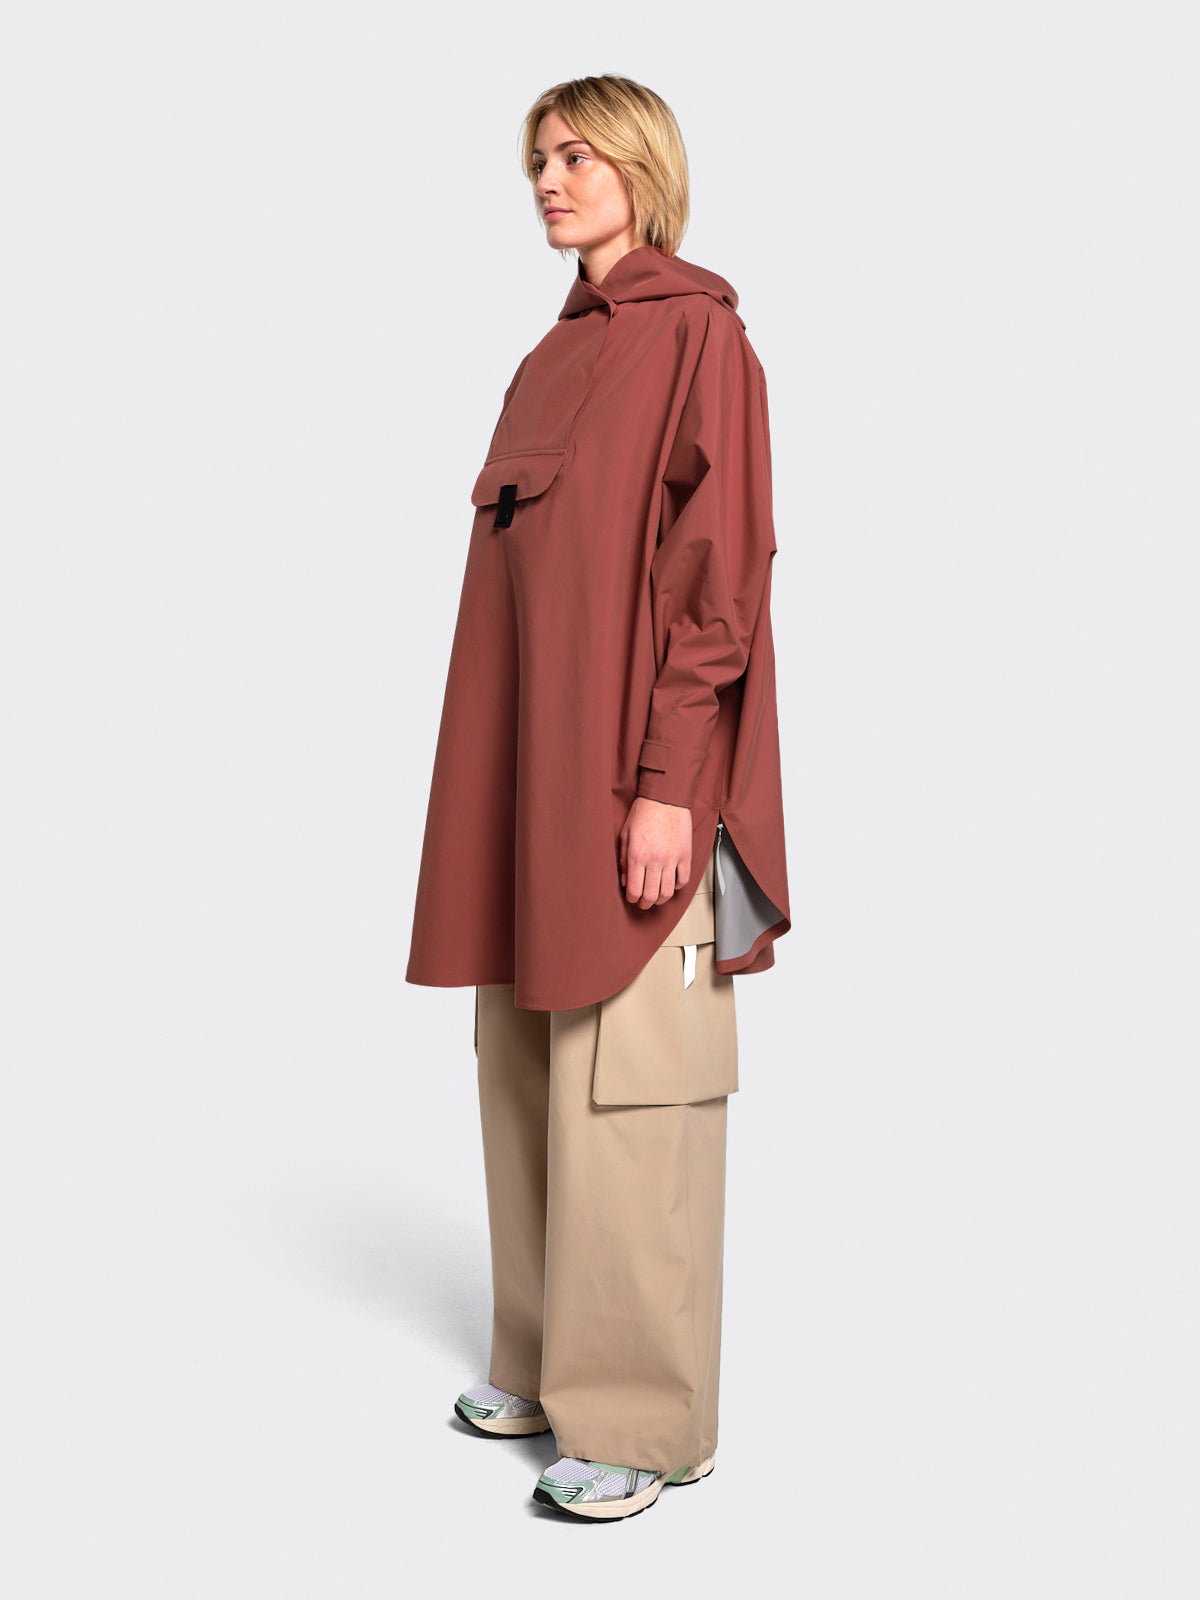 Woman in Bergen poncho from Blæst in the color Marsala